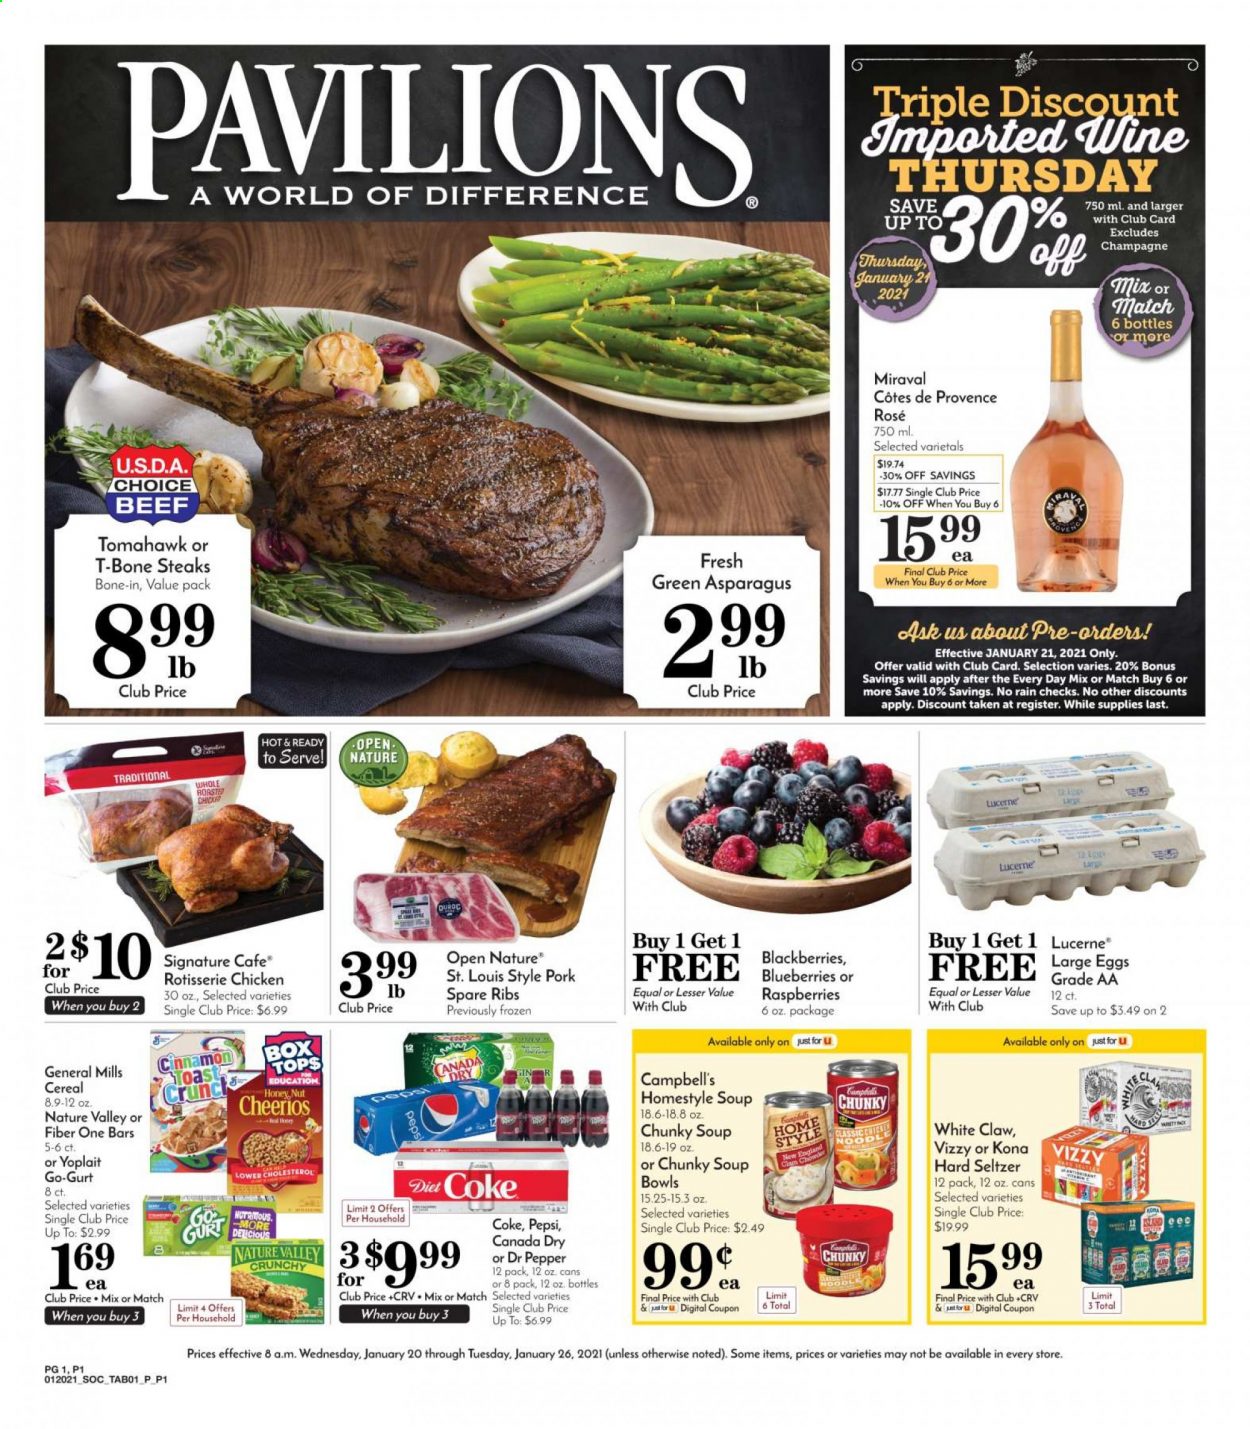 thumbnail - Pavilions Flyer - 01/20/2021 - 01/26/2021 - Sales products - blackberries, blueberries, raspberries, toast bread, clams, Campbell's, soup, Yoplait, large eggs, cereals, Cheerios, Nature Valley, Fiber One, noodles, cinnamon, Canada Dry, Coca-Cola, Pepsi, Dr. Pepper, Diet Coke, seltzer water, champagne, wine, gin, White Claw, Hard Seltzer, beef meat, t-bone steak, steak, tomahawk steak, pork meat, pork spare ribs, rose. Page 1.